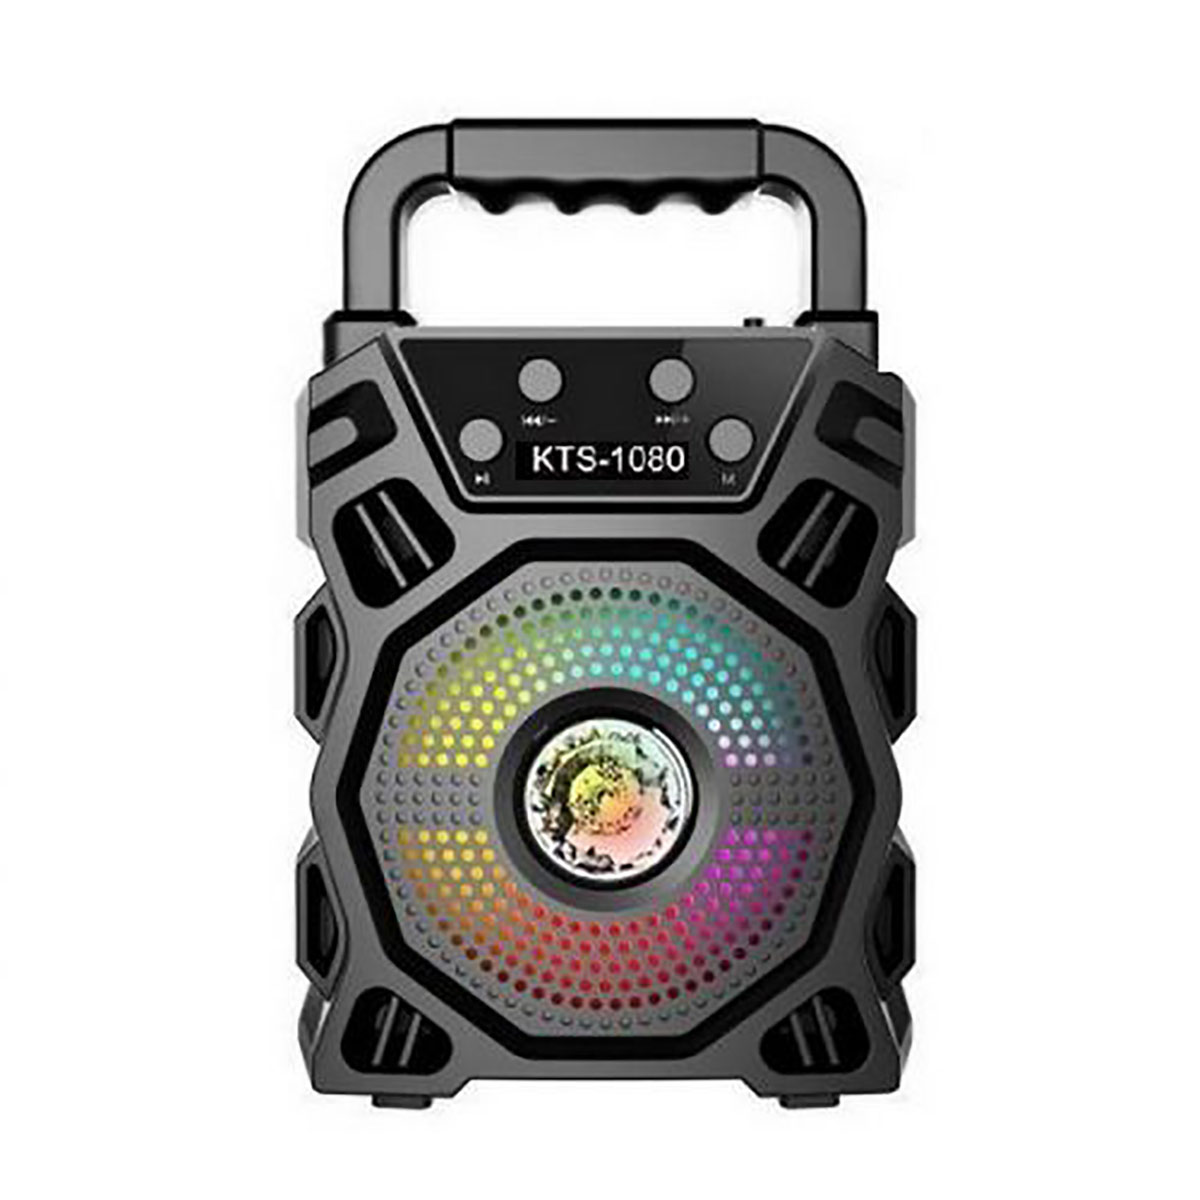 SPEAKER BLUETOOTH KTS FOR MP3 & MOBILE & FM & SD CARD USB & AUX  1080  4.0 INCH ,Speakers